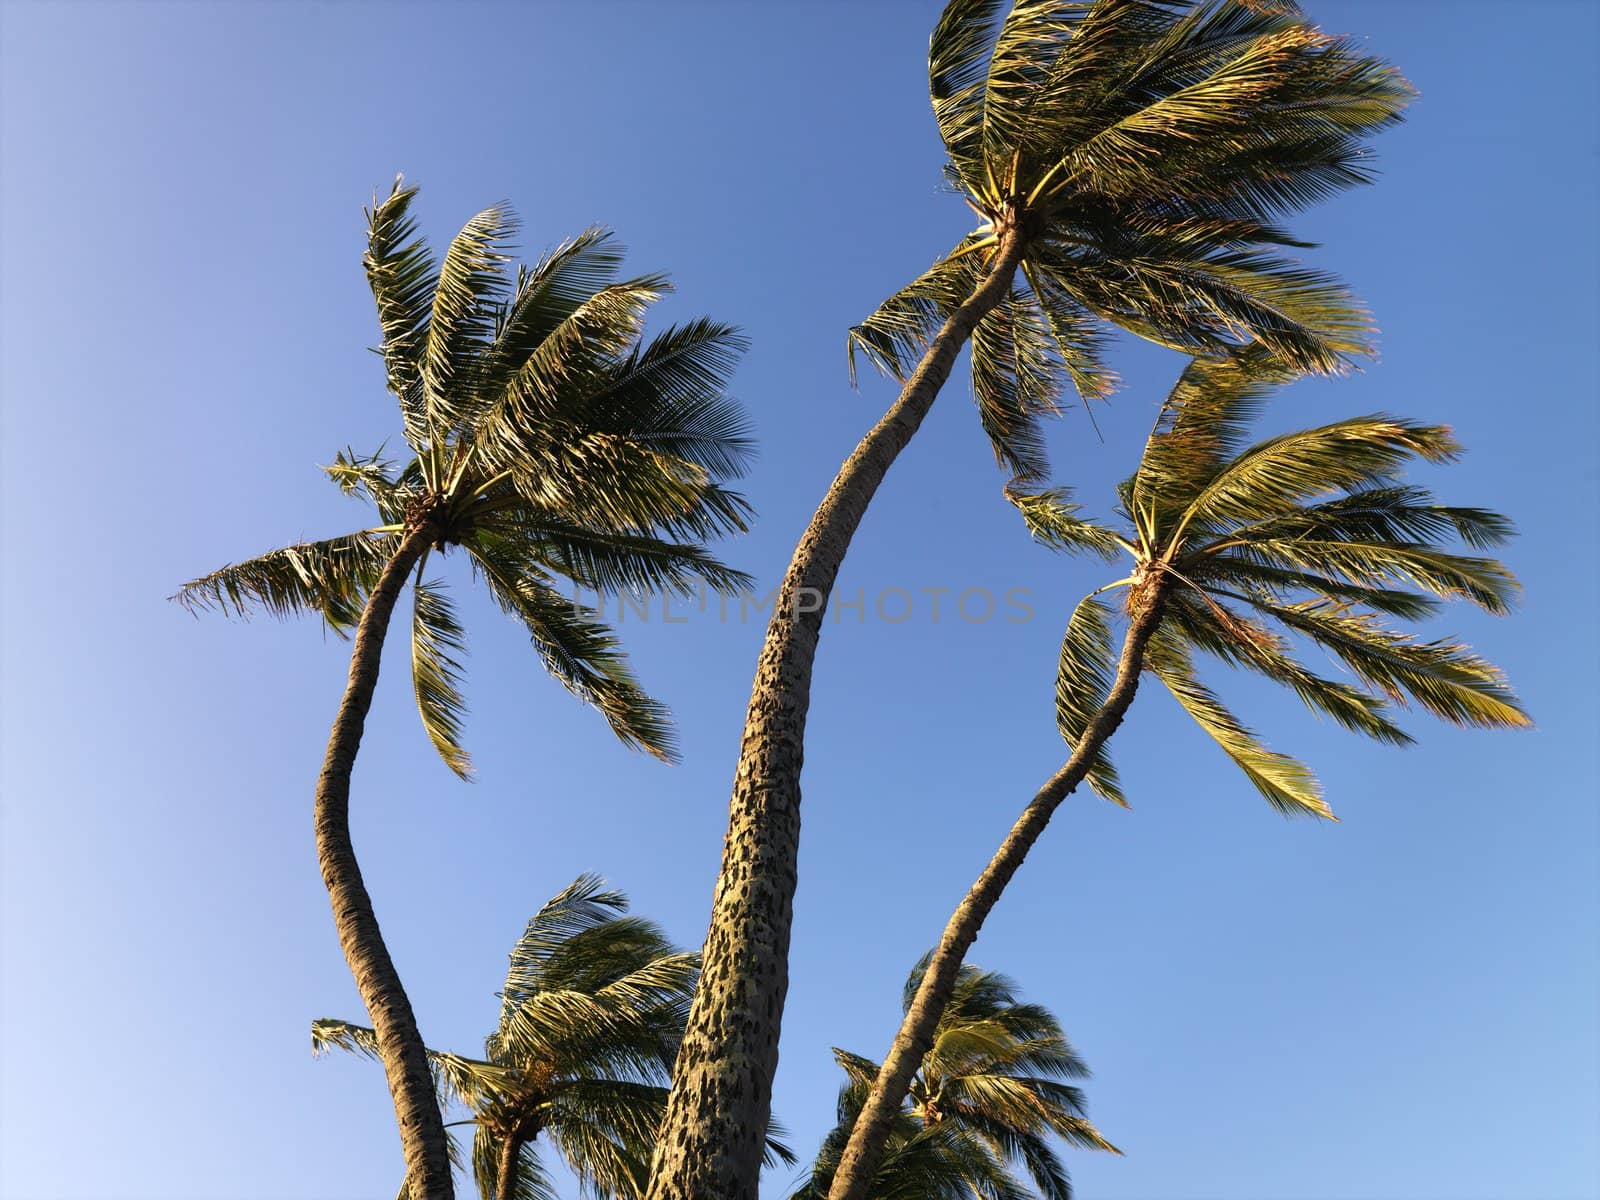 Palm trees against blue sky blowing in the wind in Maui, Hawaii.